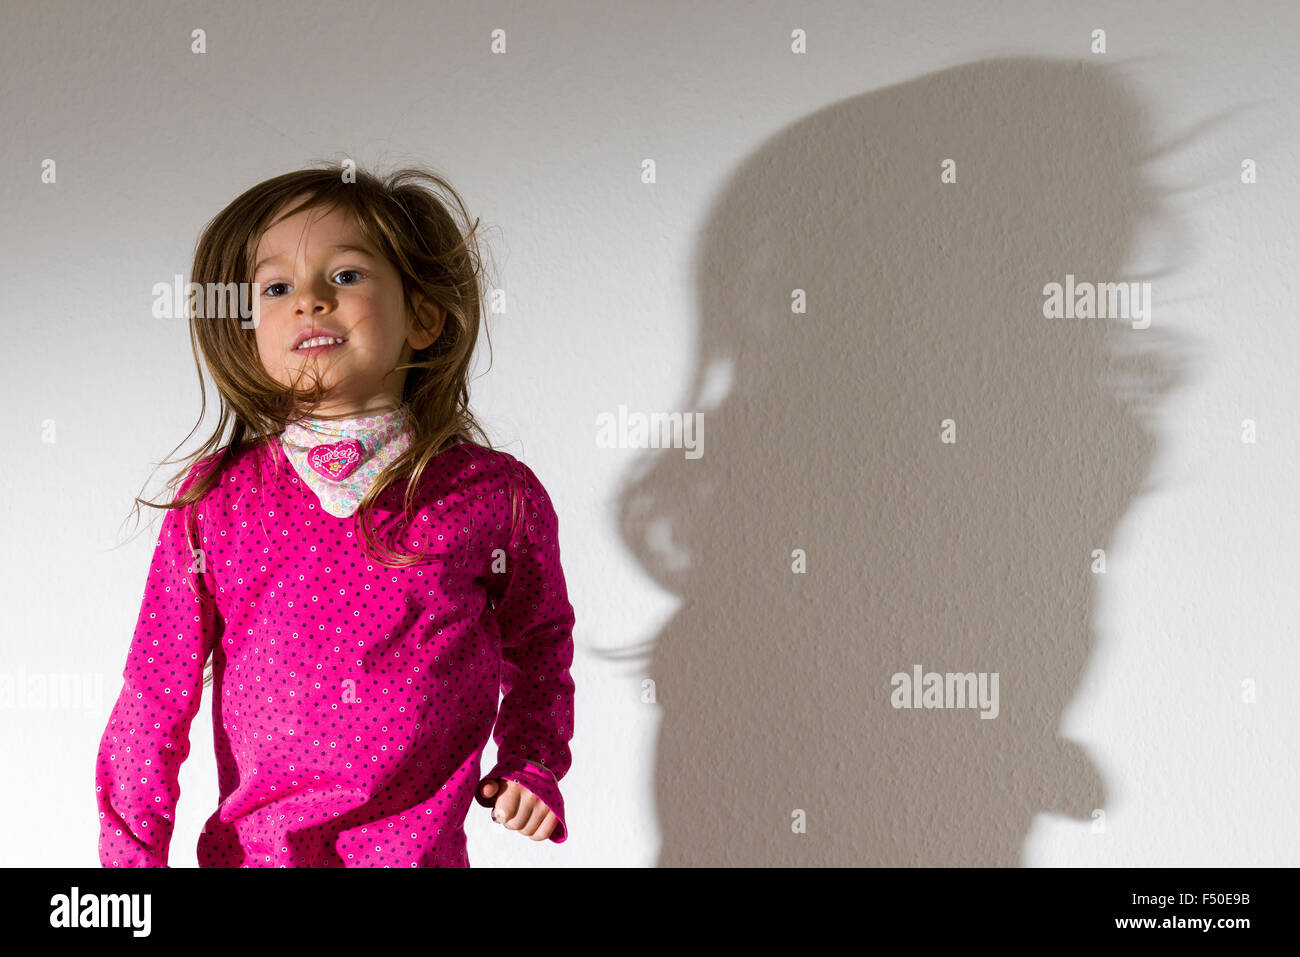 A blond three year old girl, wearing a pink shirt, is dancing with open hair in front of a white wall, leaving her shadow behind Stock Photo